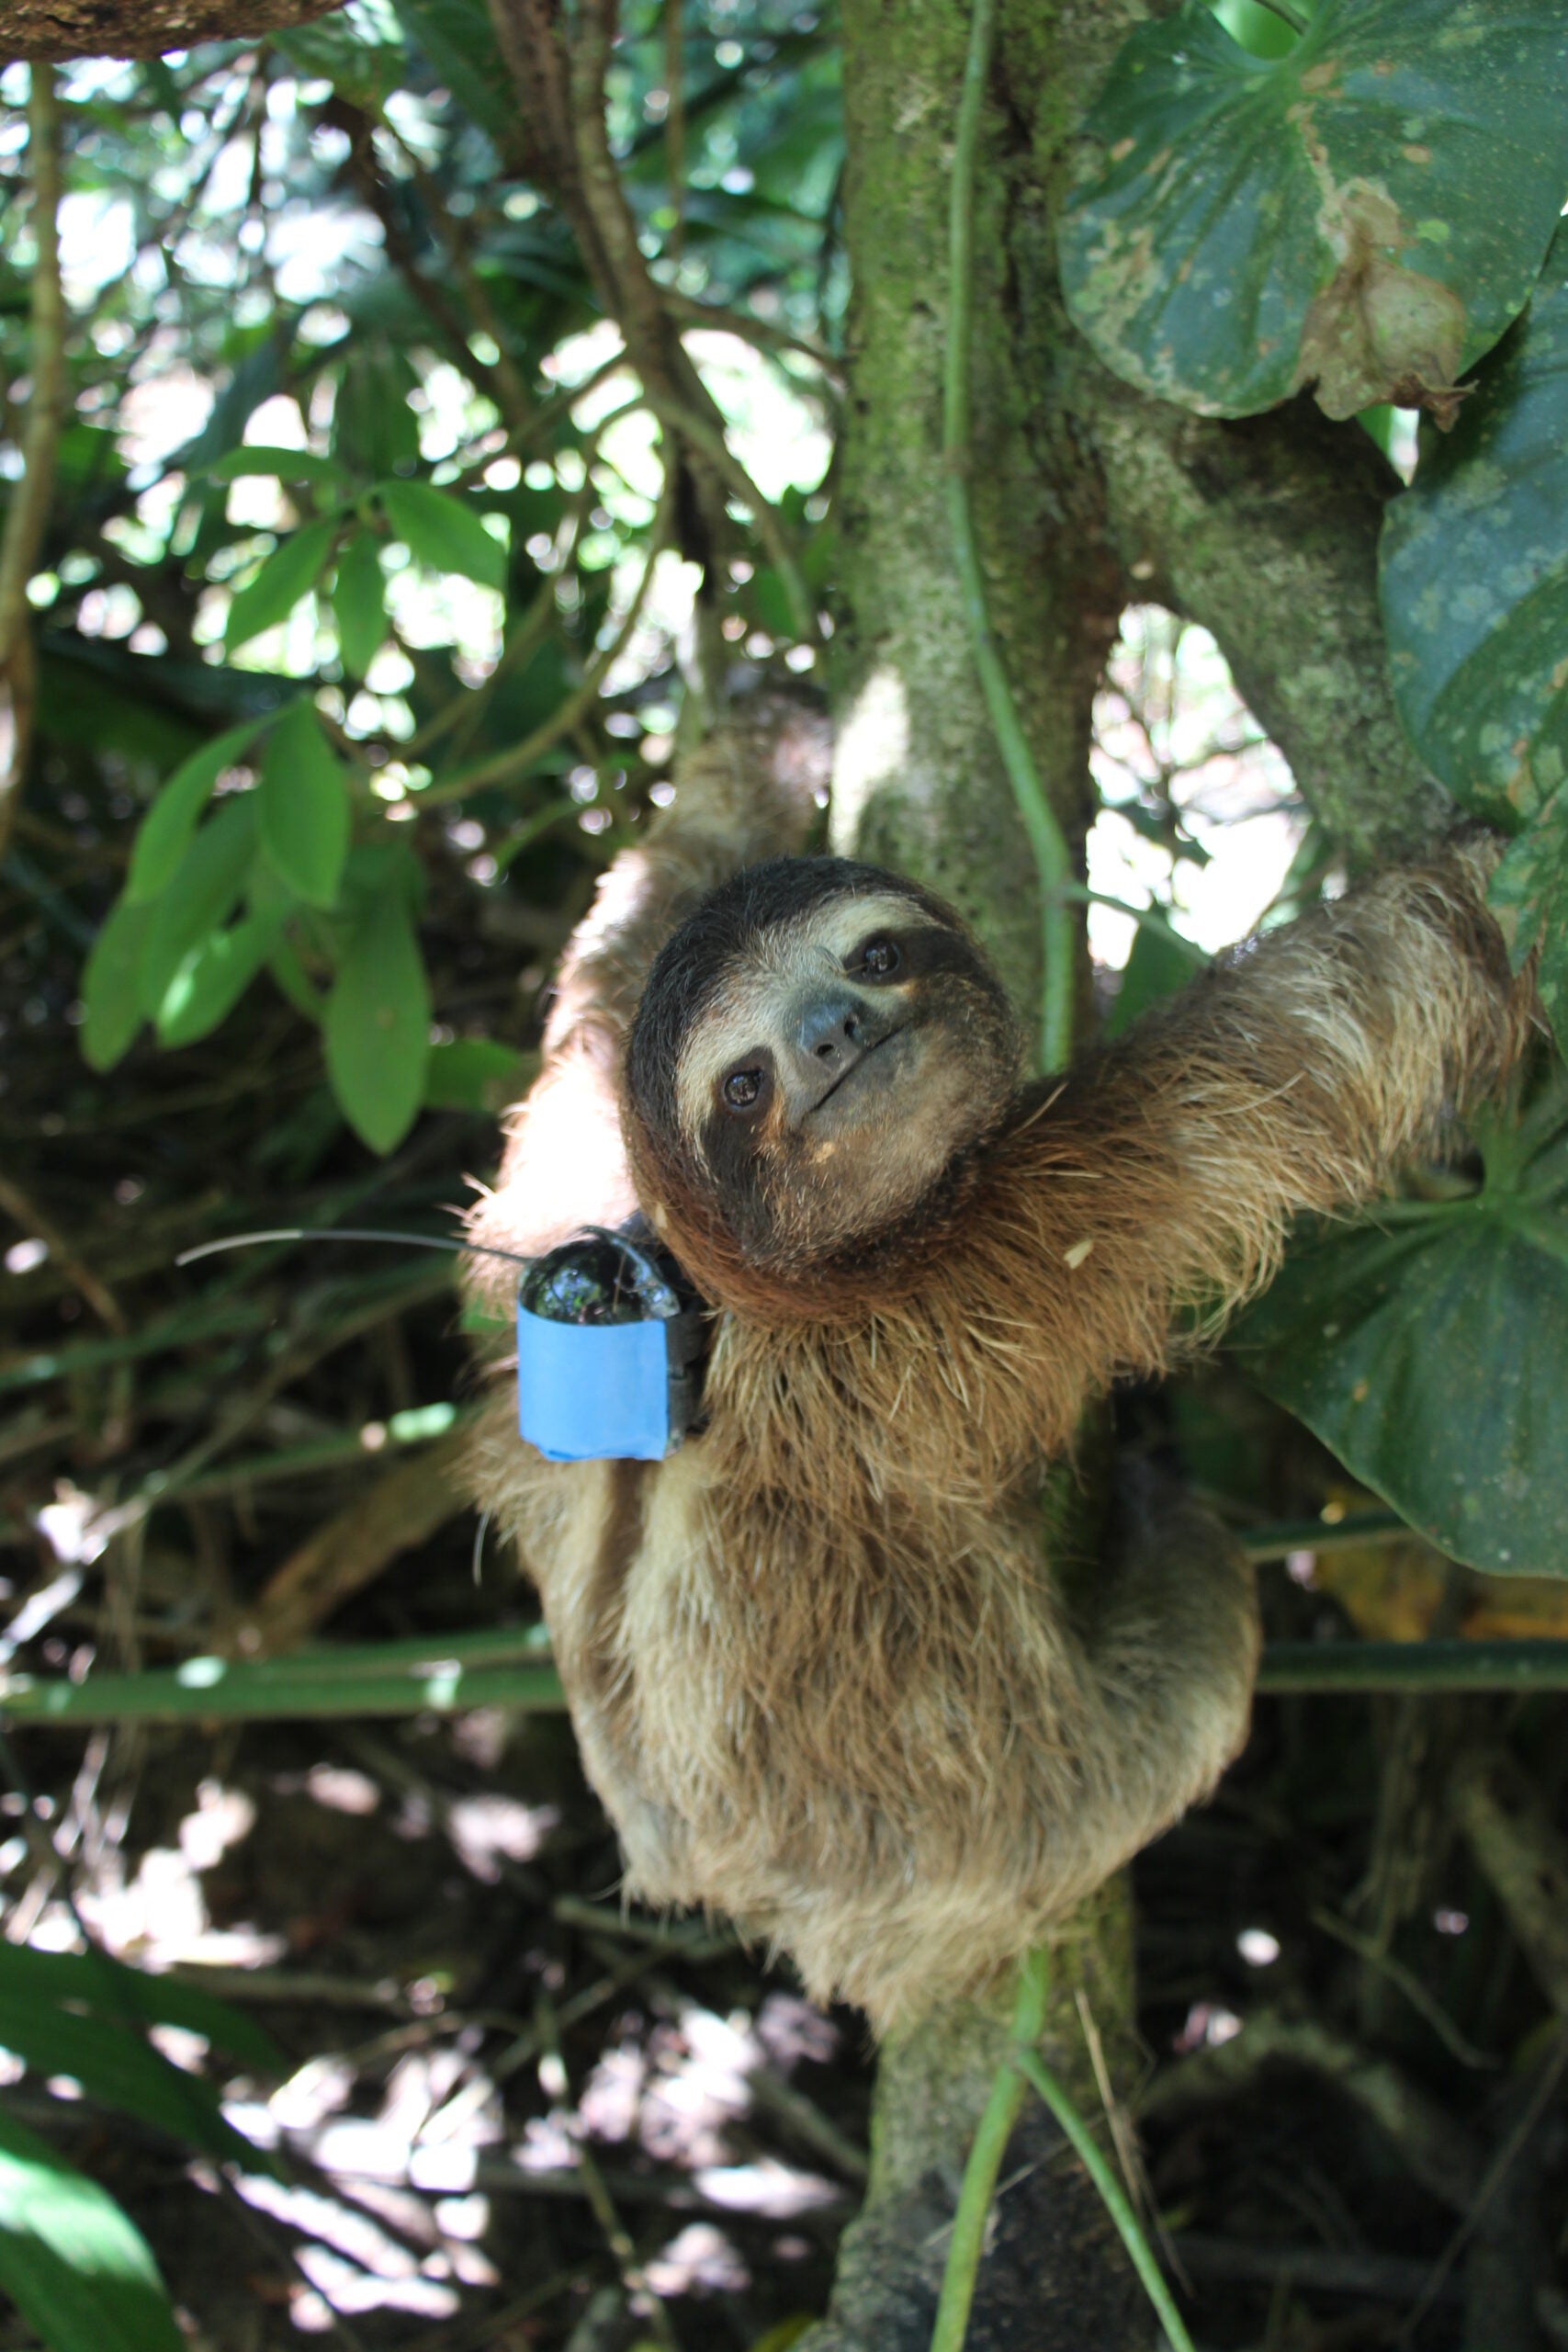 A sloth from the study wearing a micro data logger